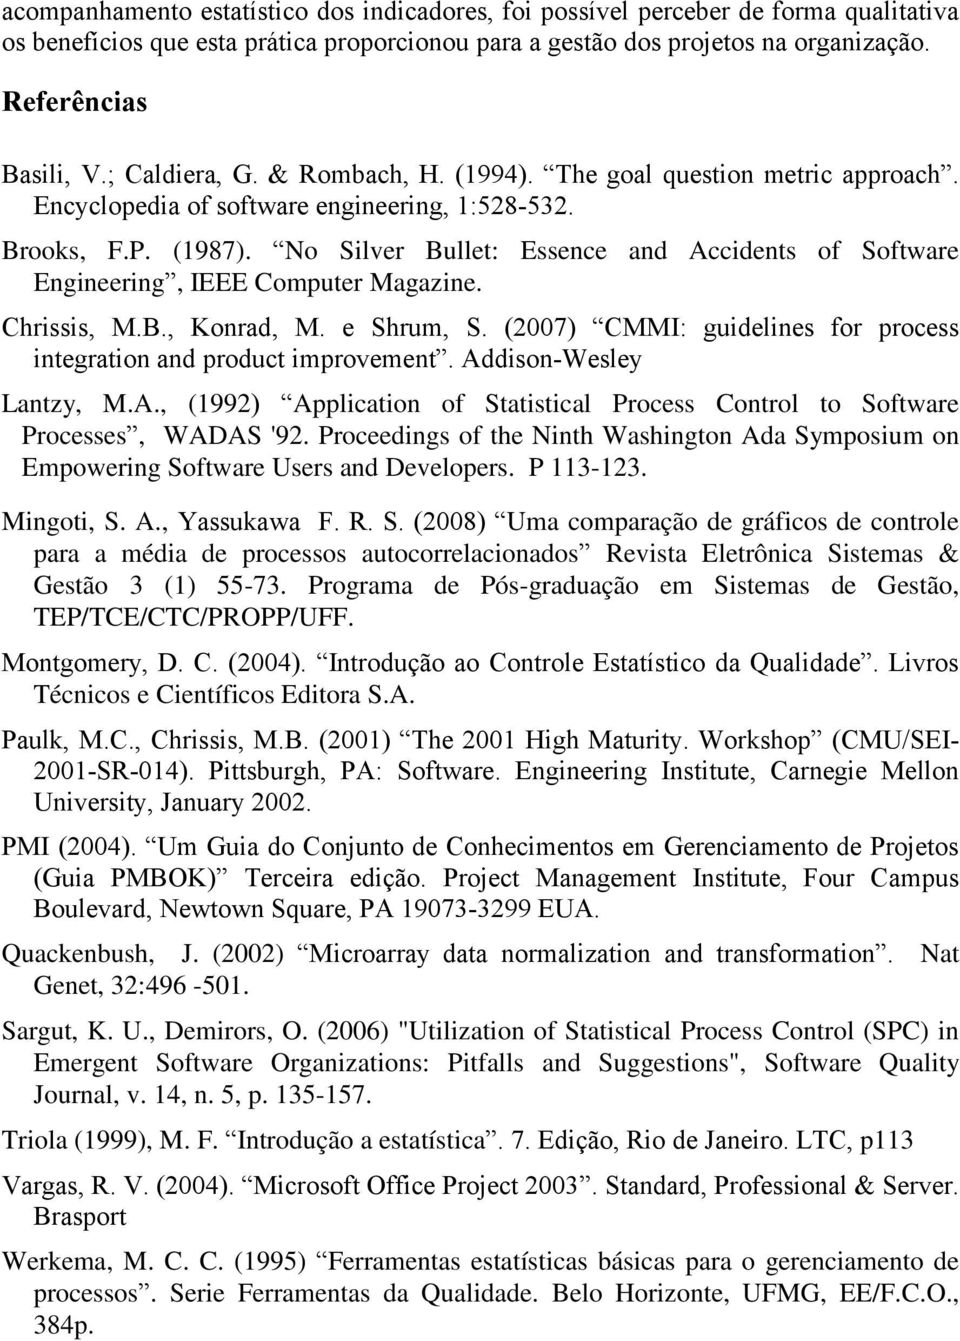 No Silver Bullet: Essence and Accidents of Software Engineering, IEEE Computer Magazine. Chrissis, M.B., Konrad, M. e Shrum, S. (2007) CMMI: guidelines for process integration and product improvement.